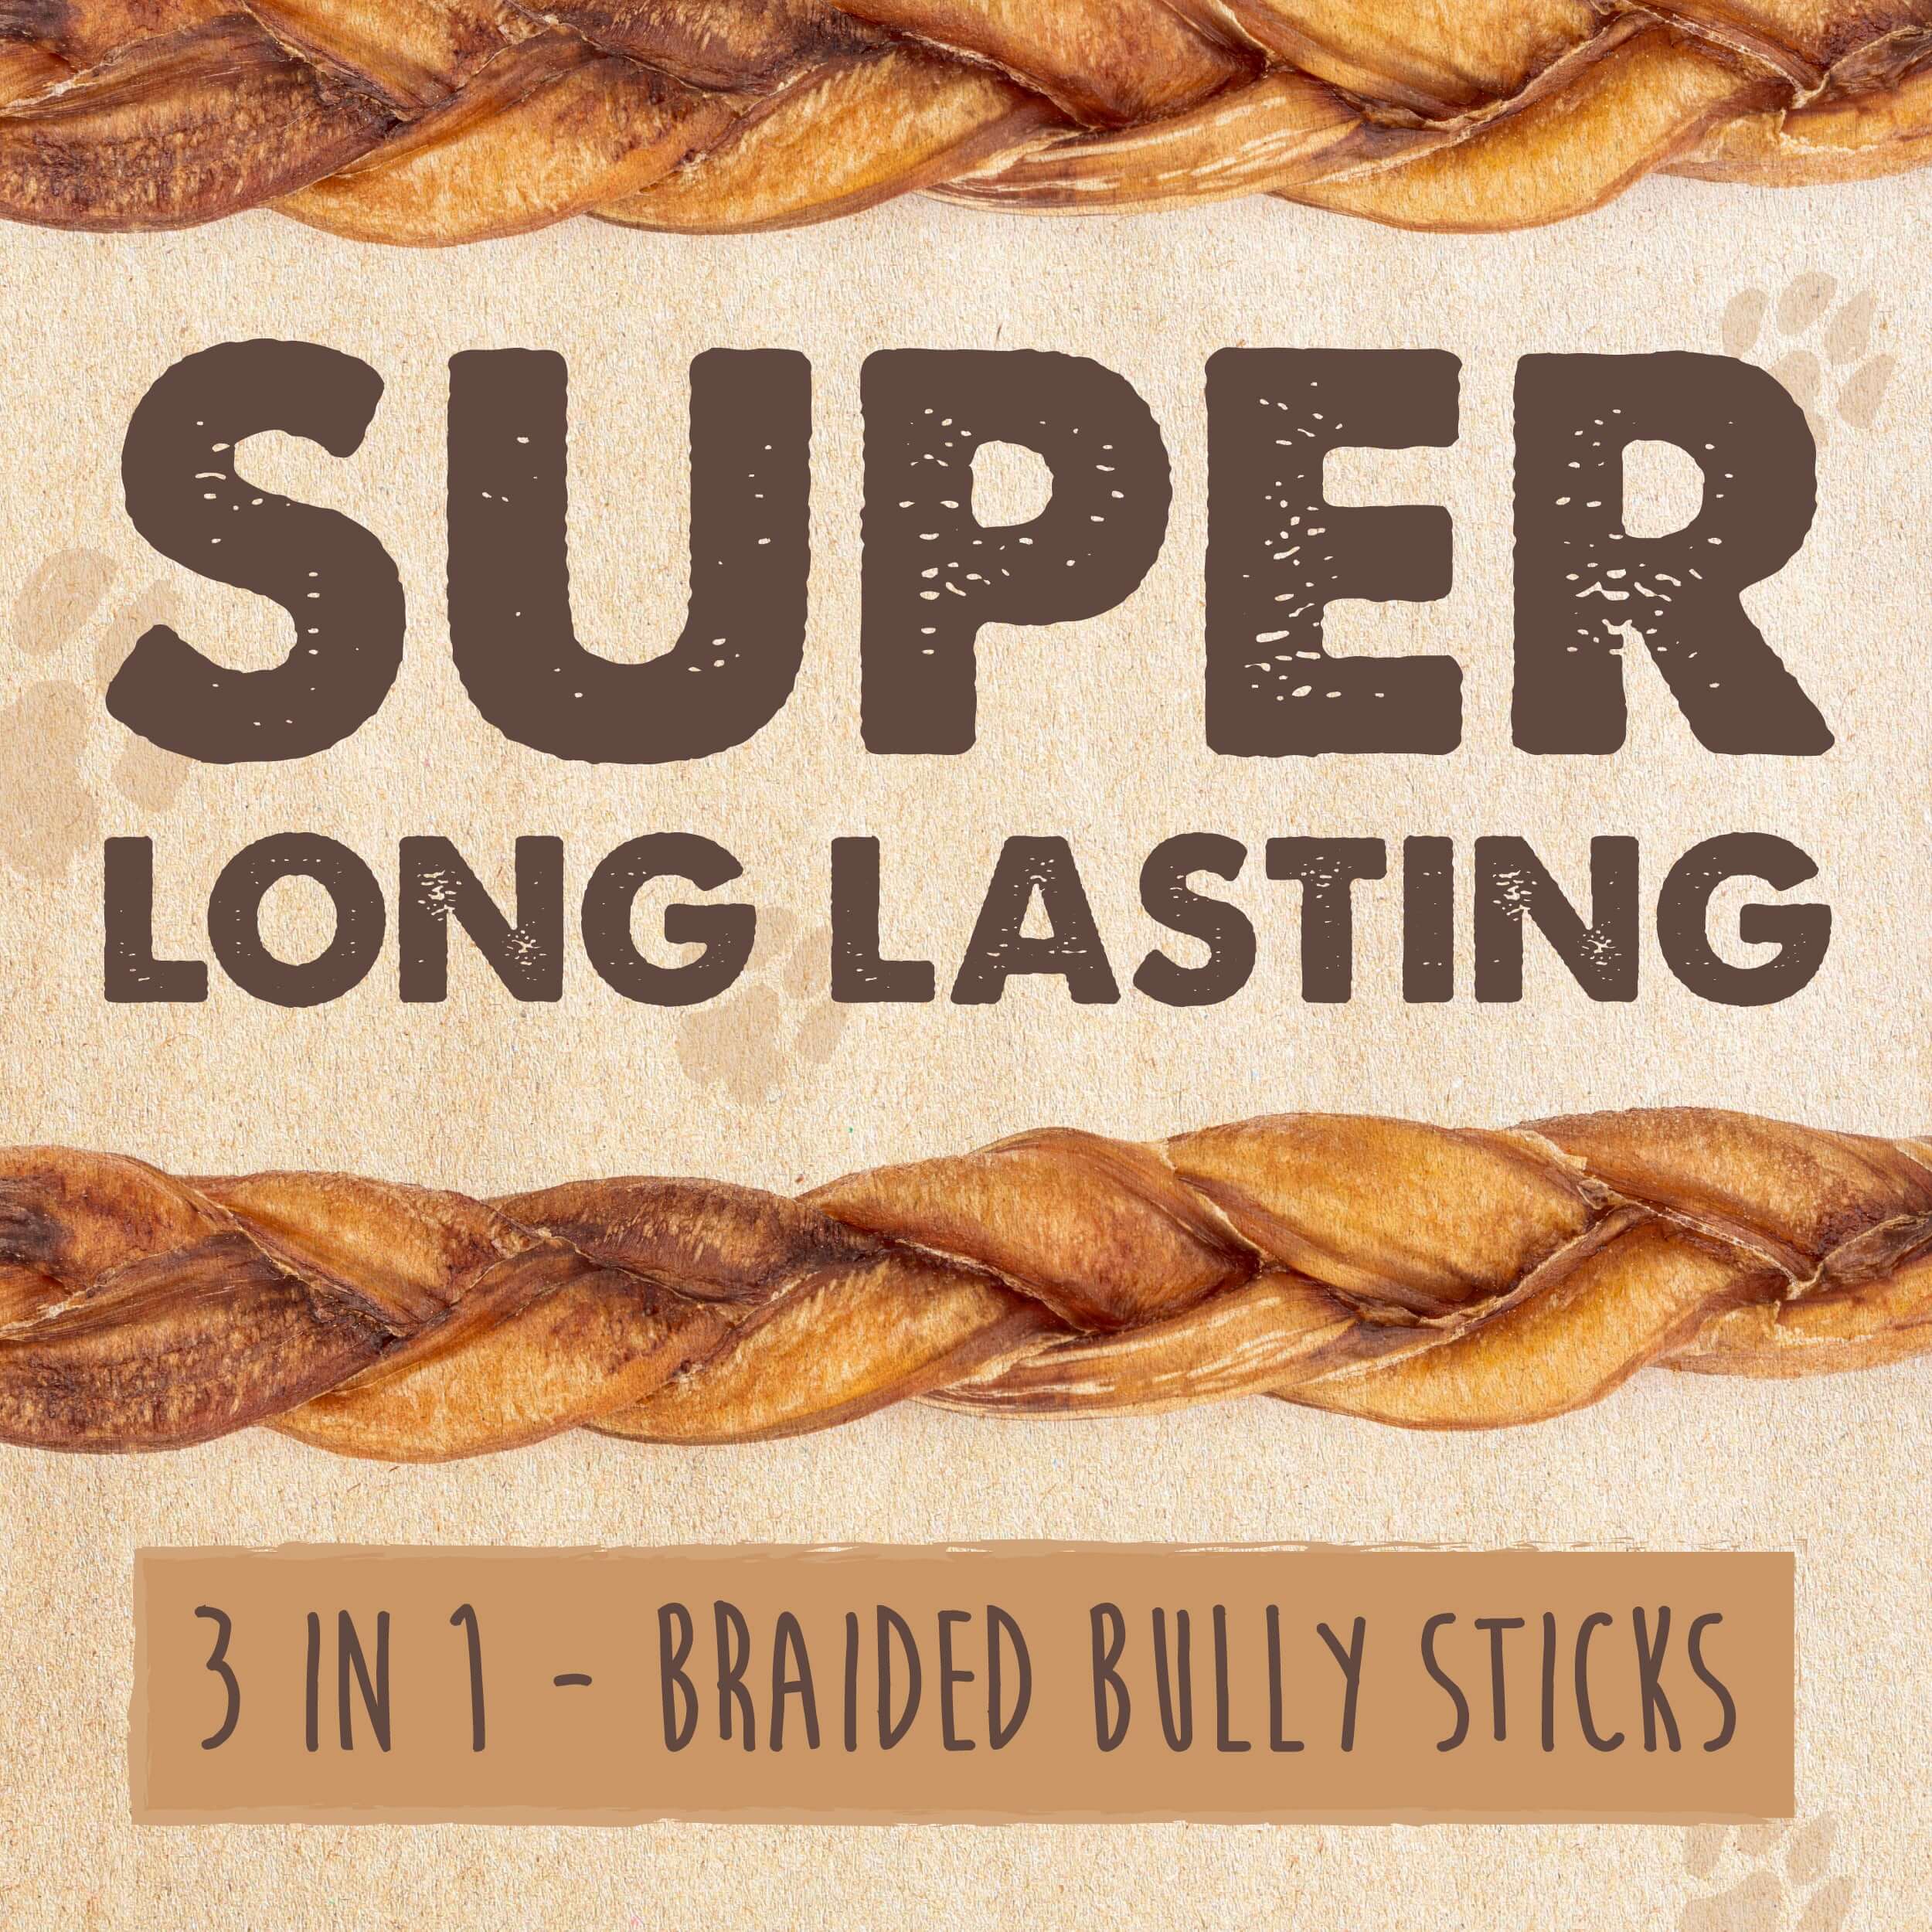 Braided Bully Sticks for Large Dogs - All-Natural, Fully Digestible Treats (5pk)